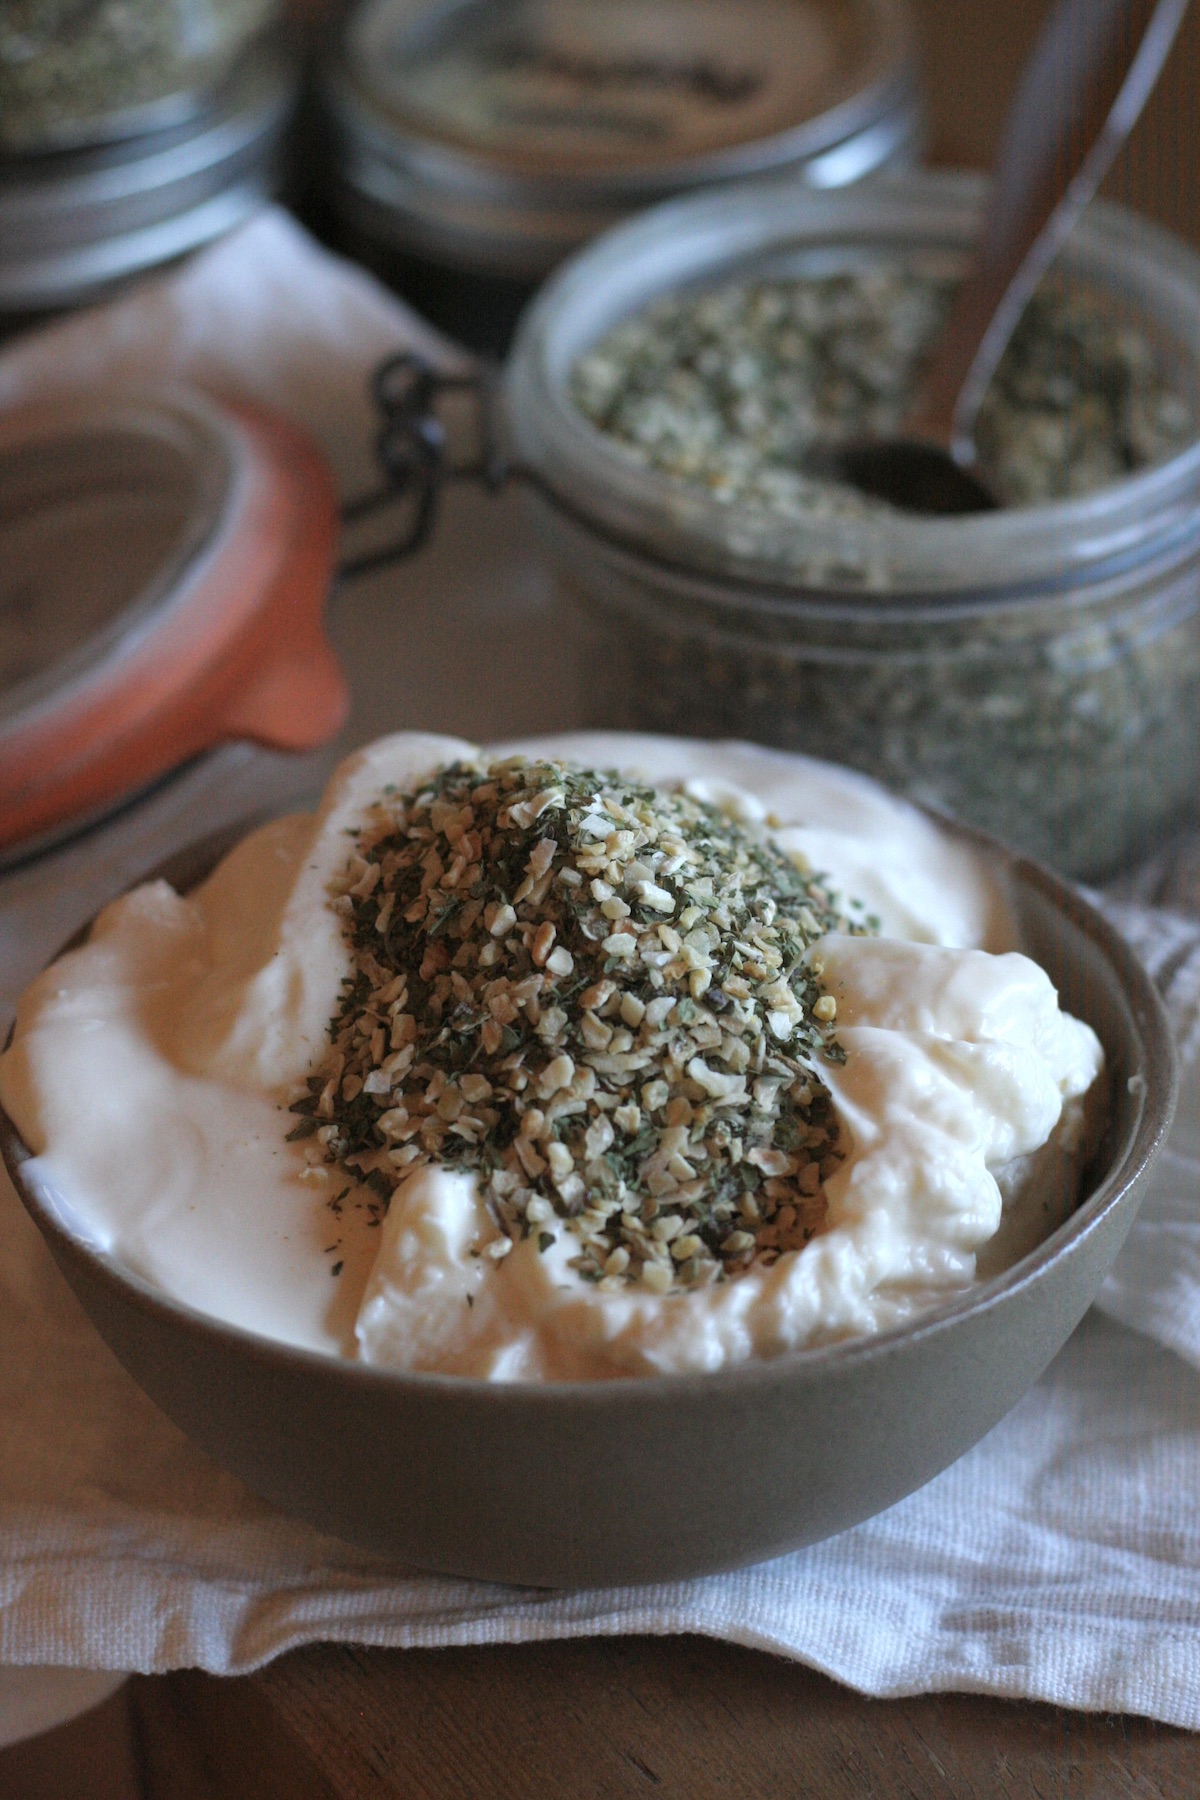 A pile of ranch seasoning in a bowl of sour cream to make dip.